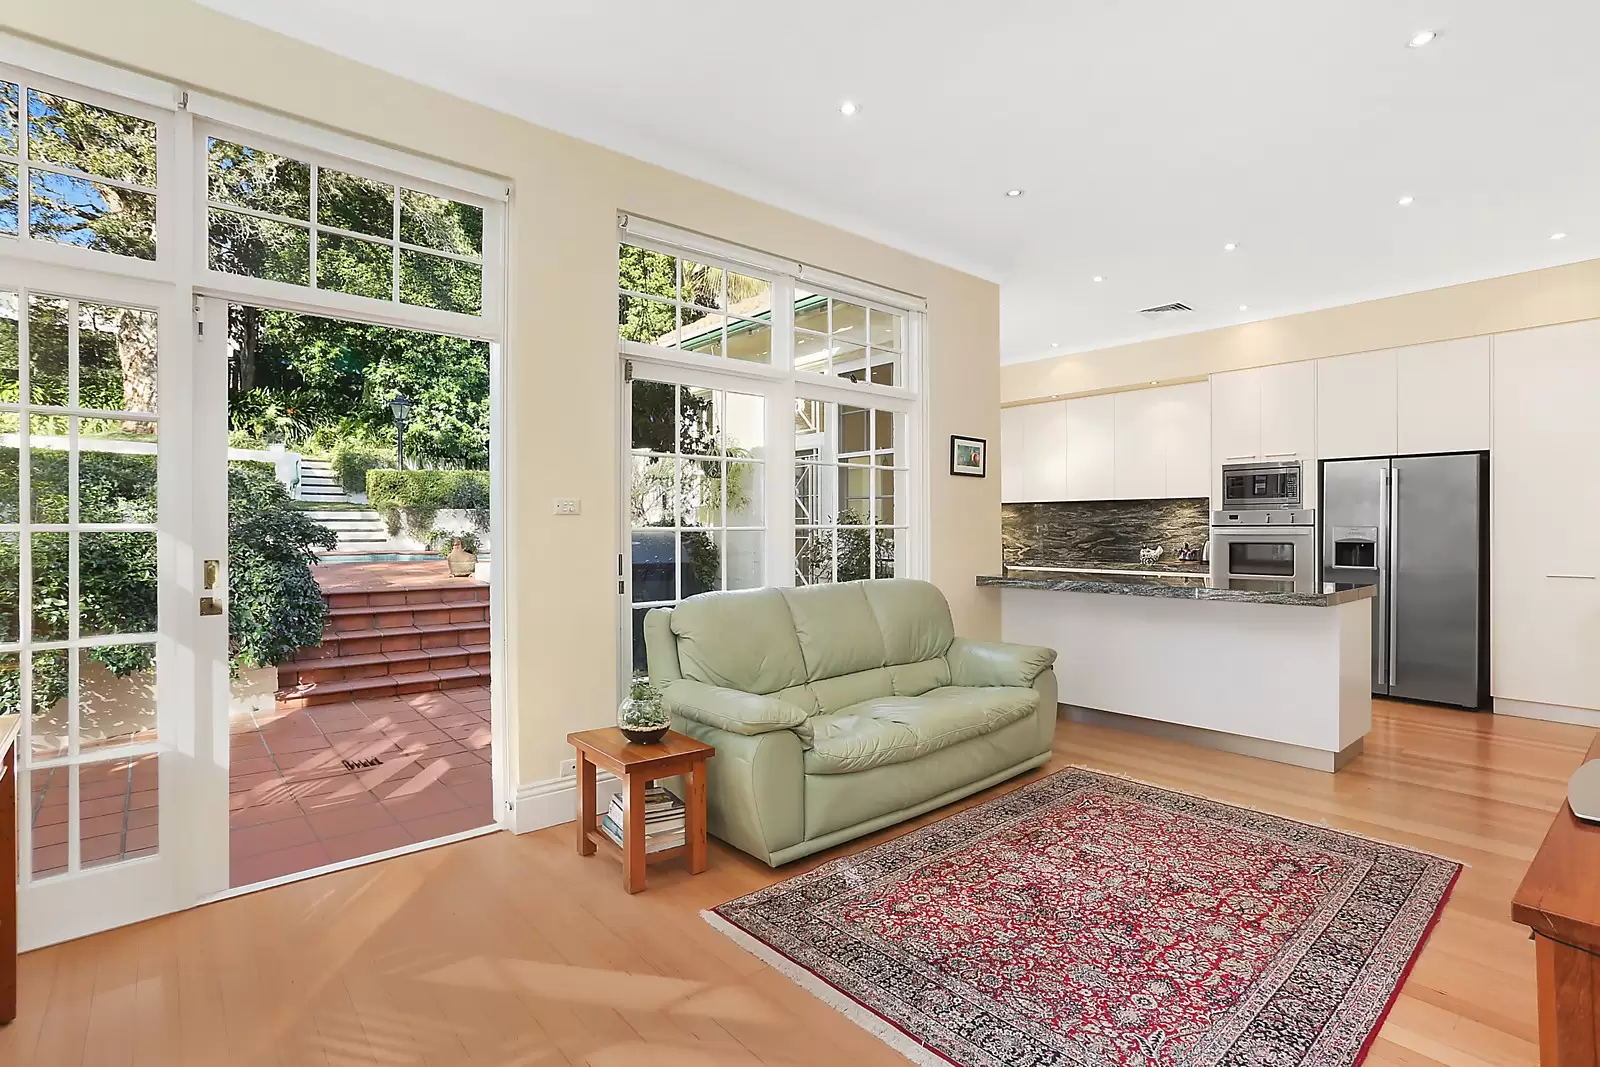 Photo #4: 6 Holland Road, Bellevue Hill - Sold by Sydney Sotheby's International Realty